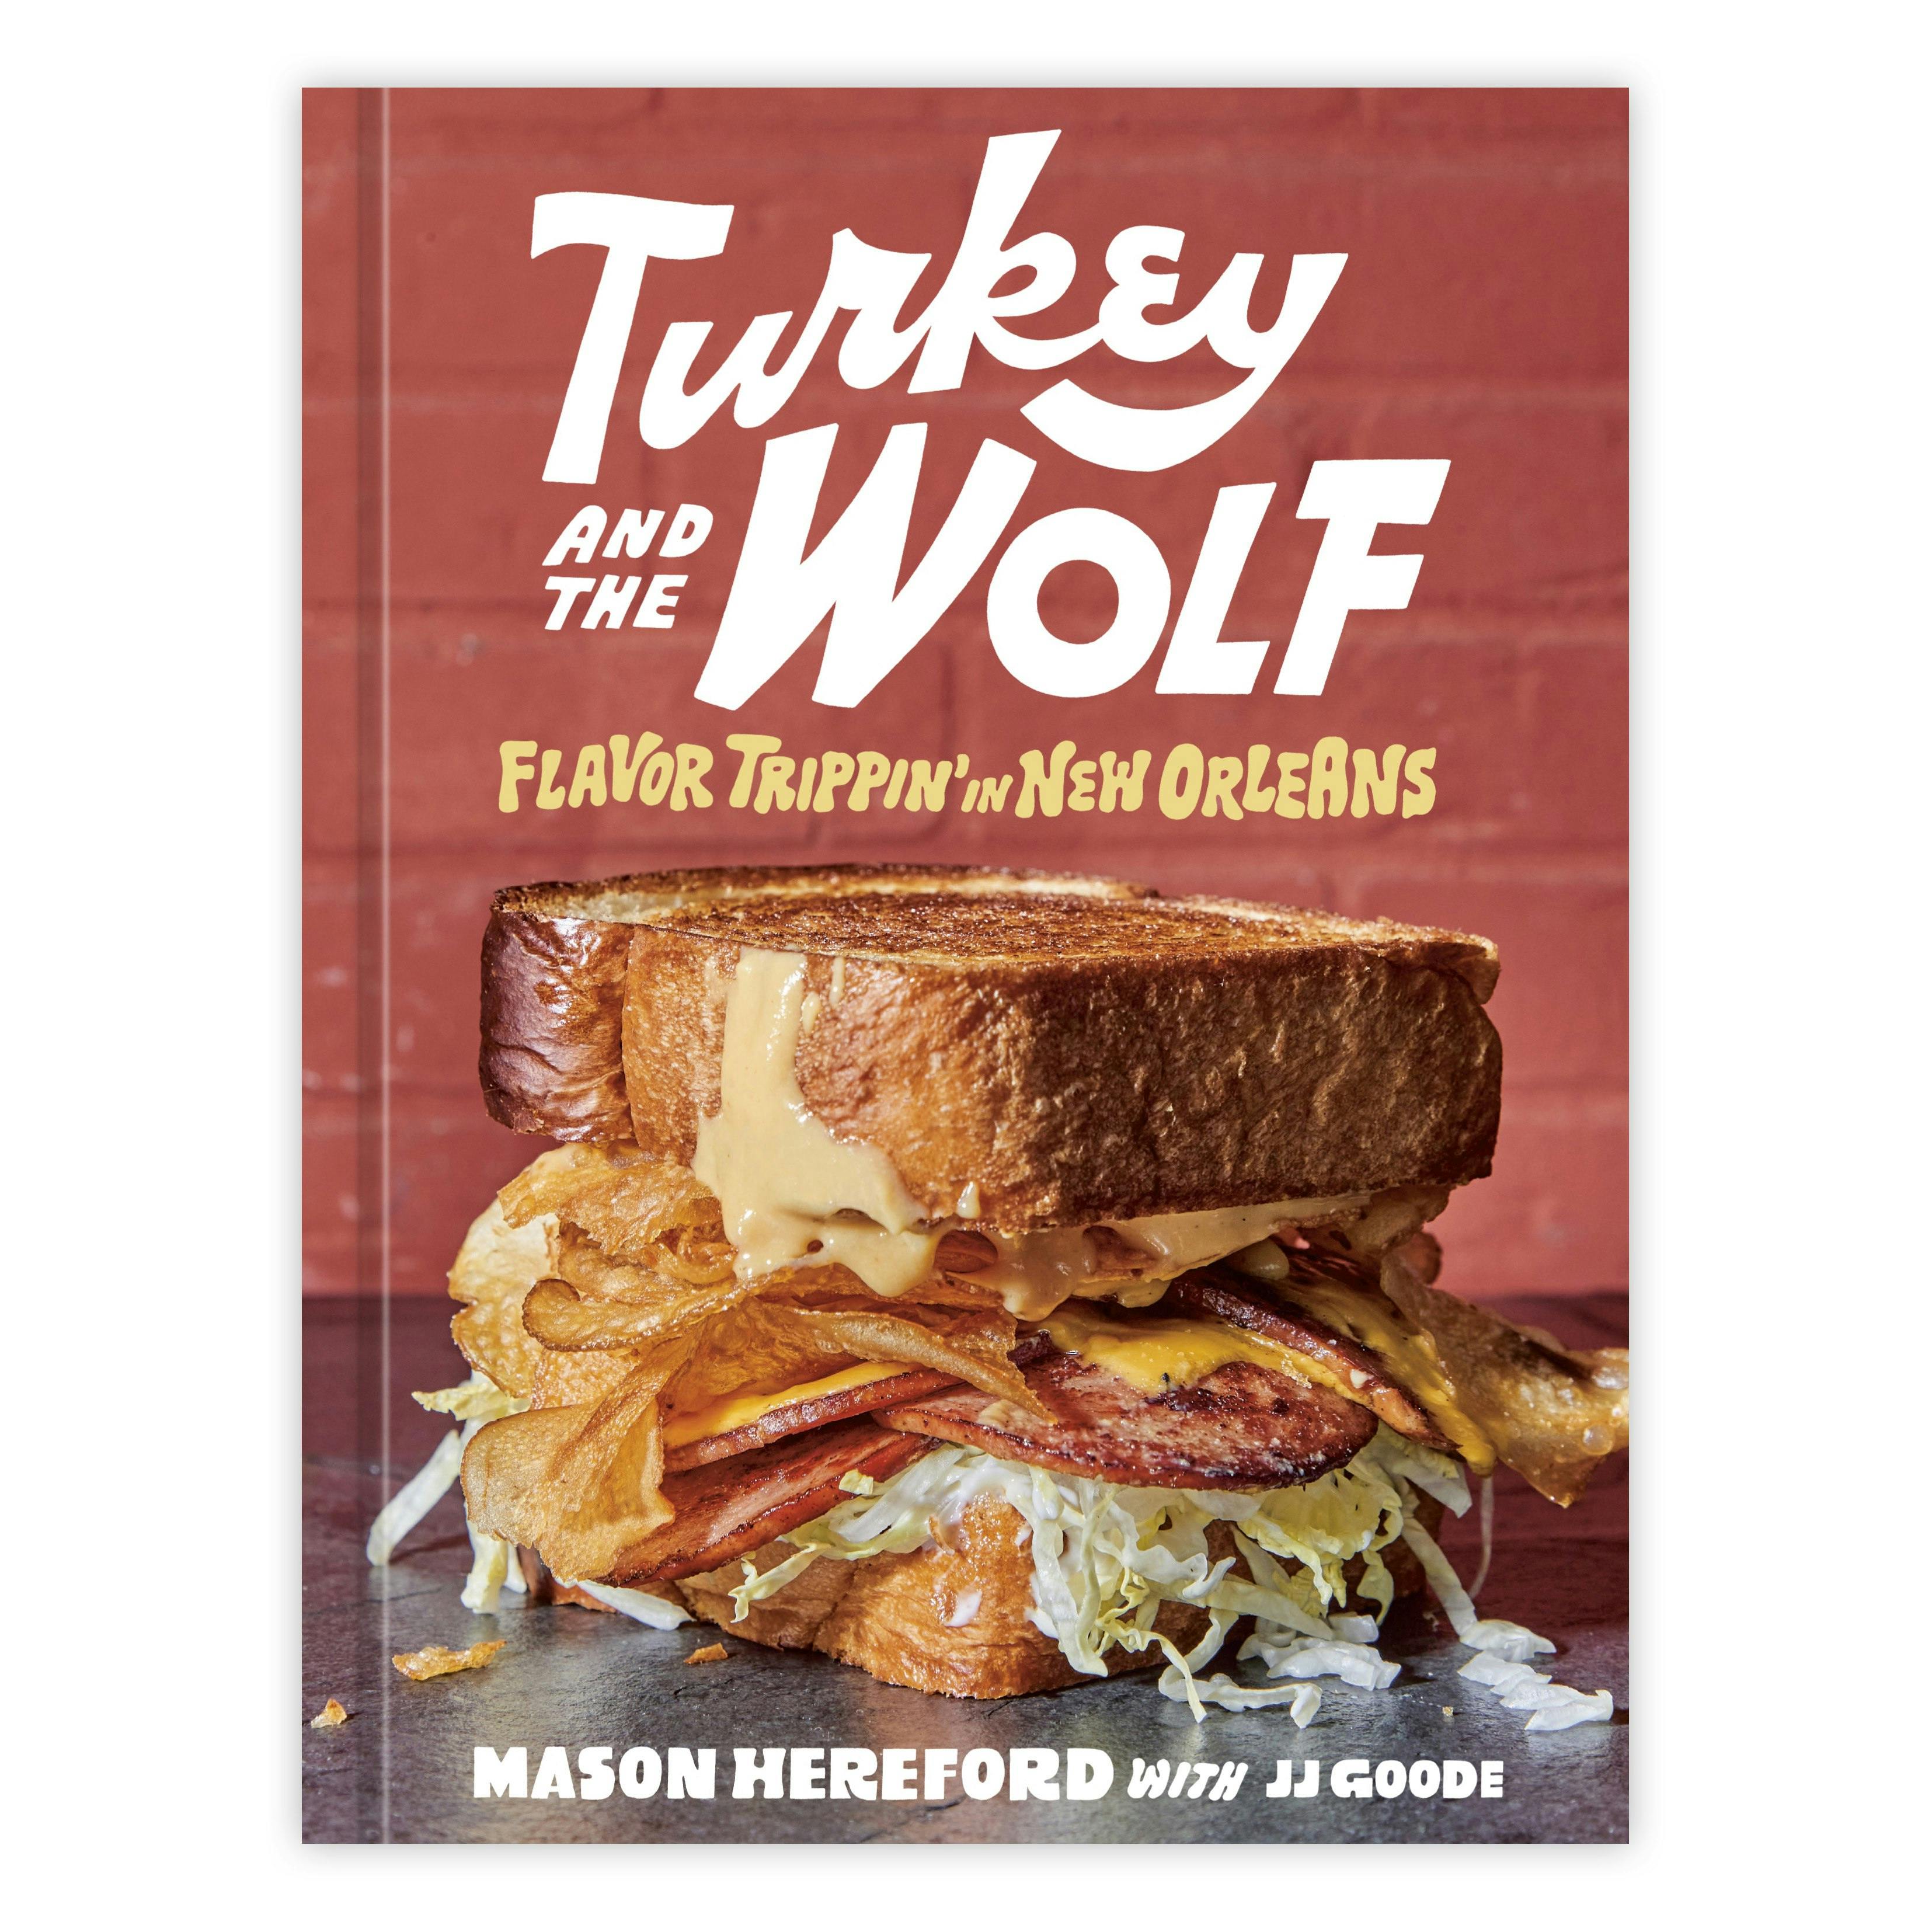 Turkey and the Wolf Cookbook